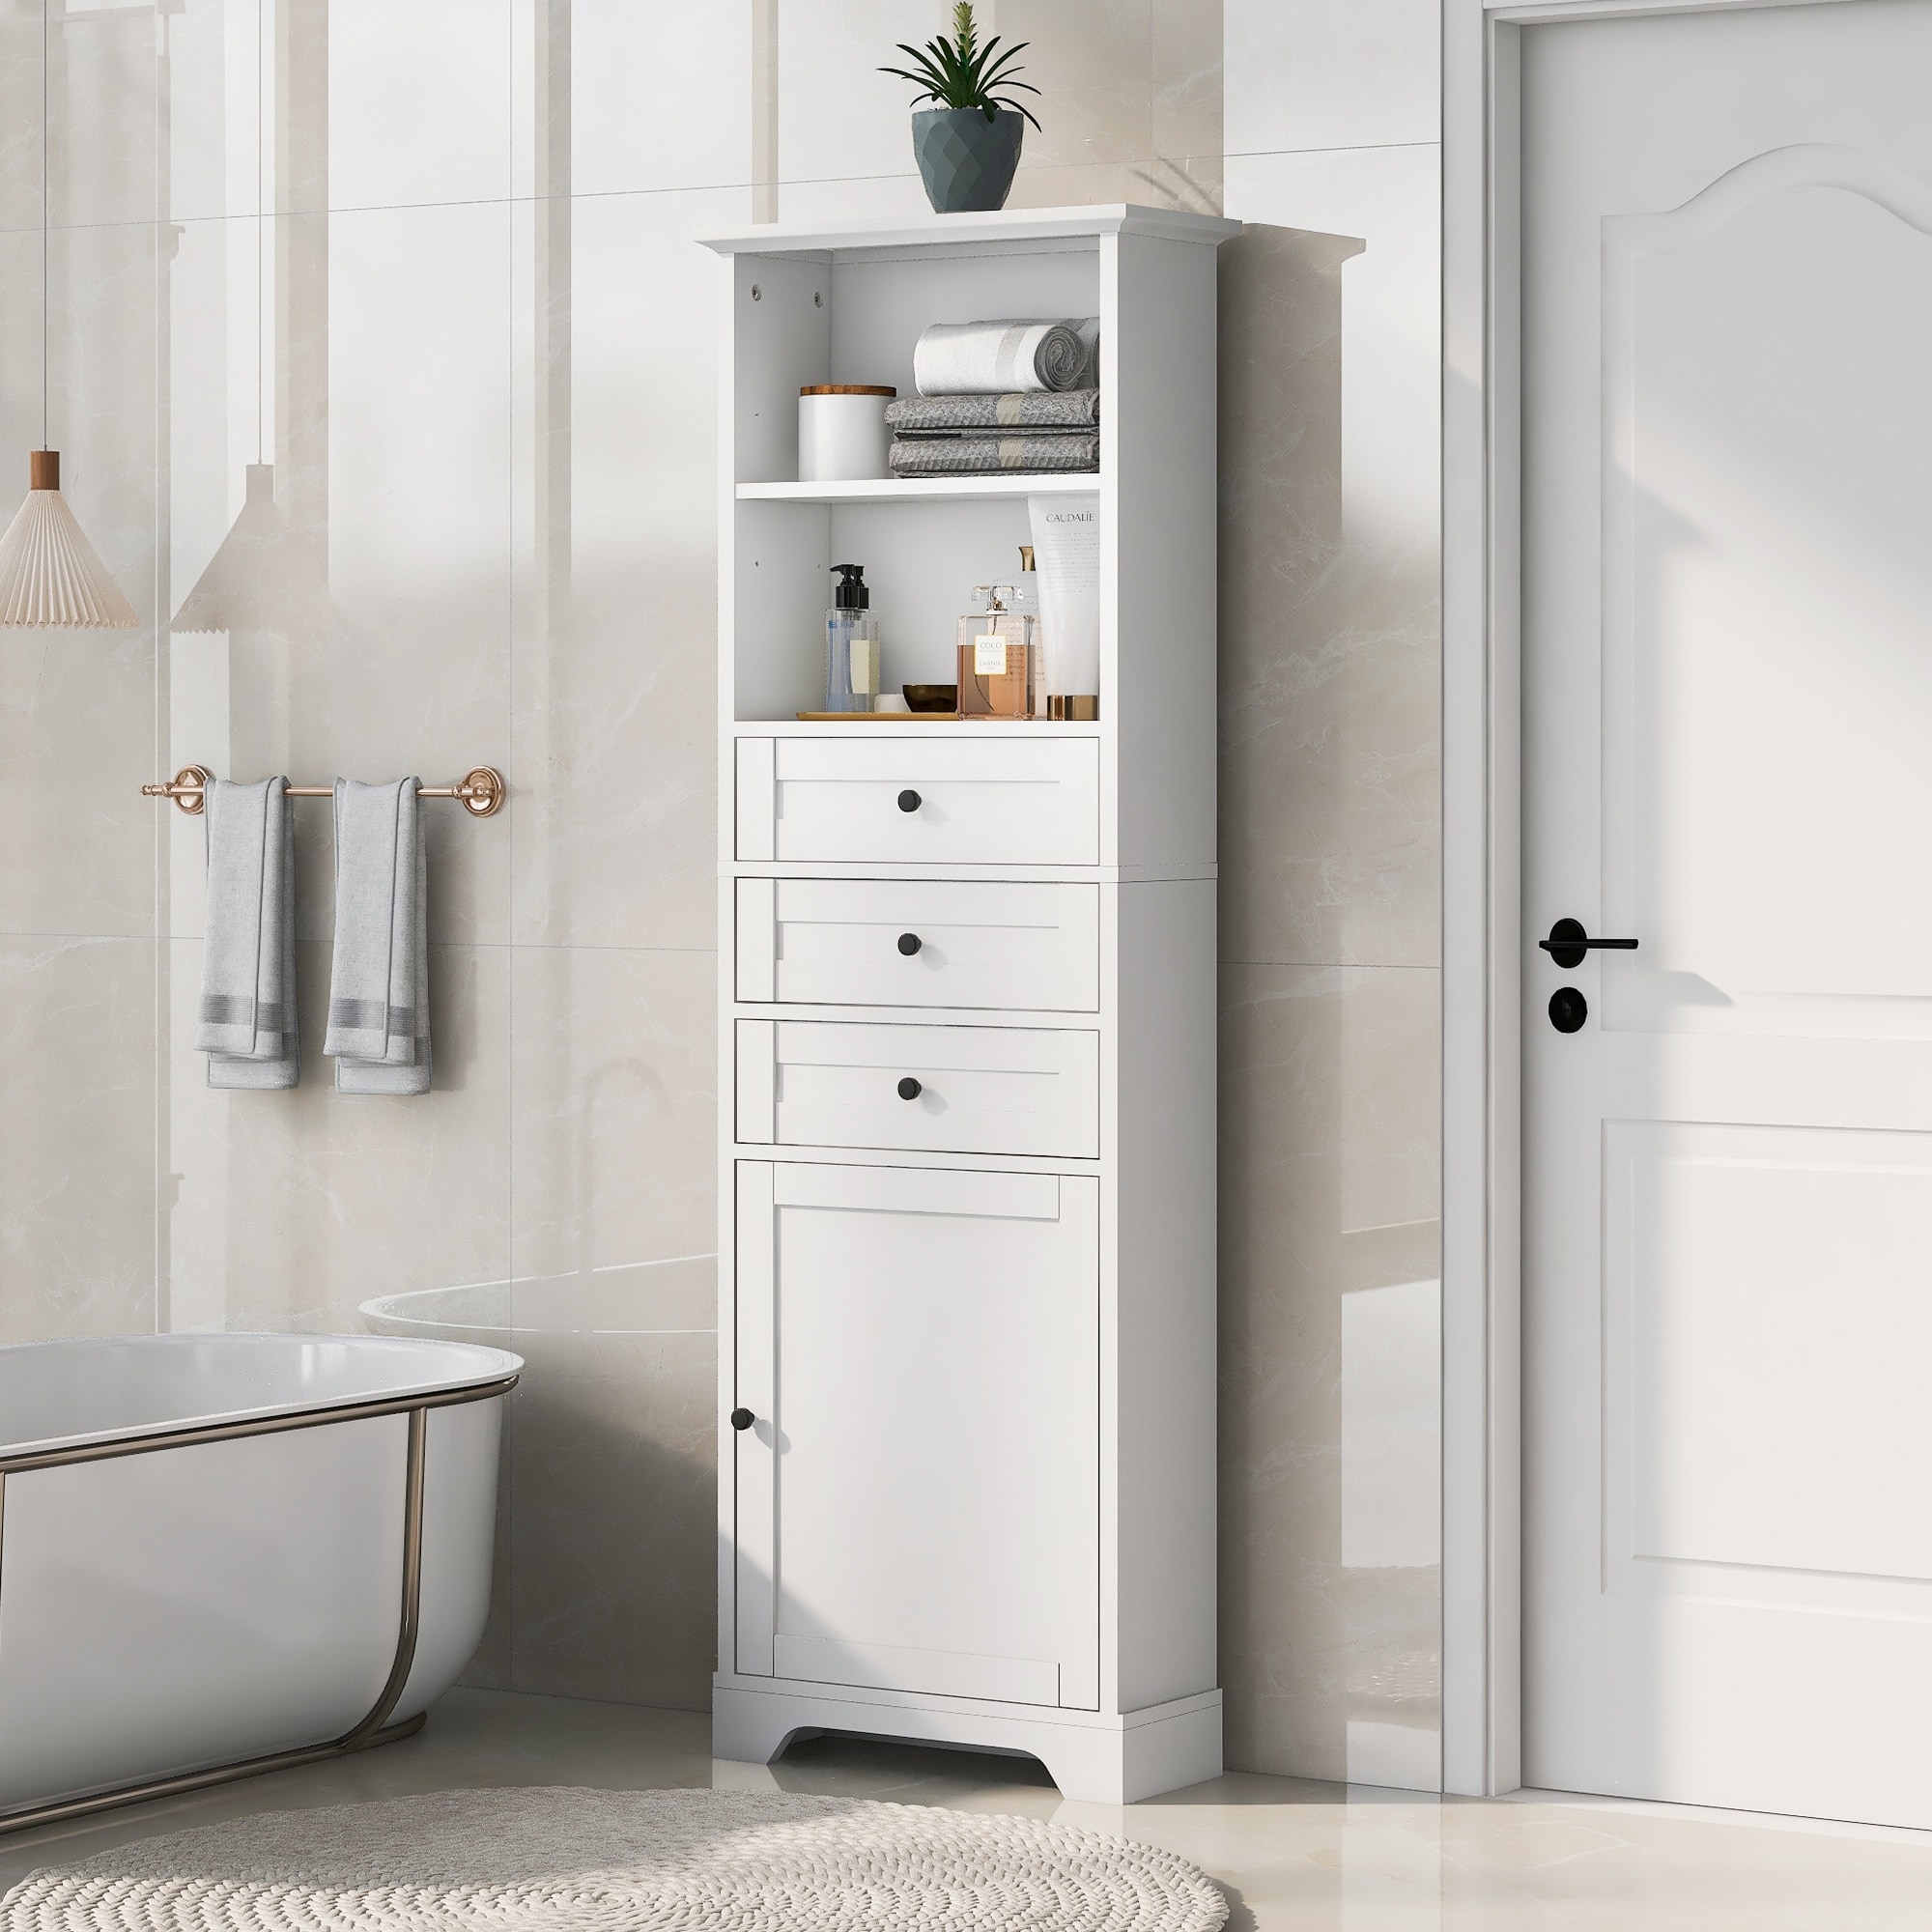 https://ak1.ostkcdn.com/images/products/is/images/direct/d0a5934b92d92cf9d9f4e34761db2794e25bbdf1/Tall-Storage-Cabinet-with-3-Drawers-and-Adjustable-Shelves-for-Bathroom%2C-Kitchen%2C-MDF-Board-with-Painted-Finish.jpg